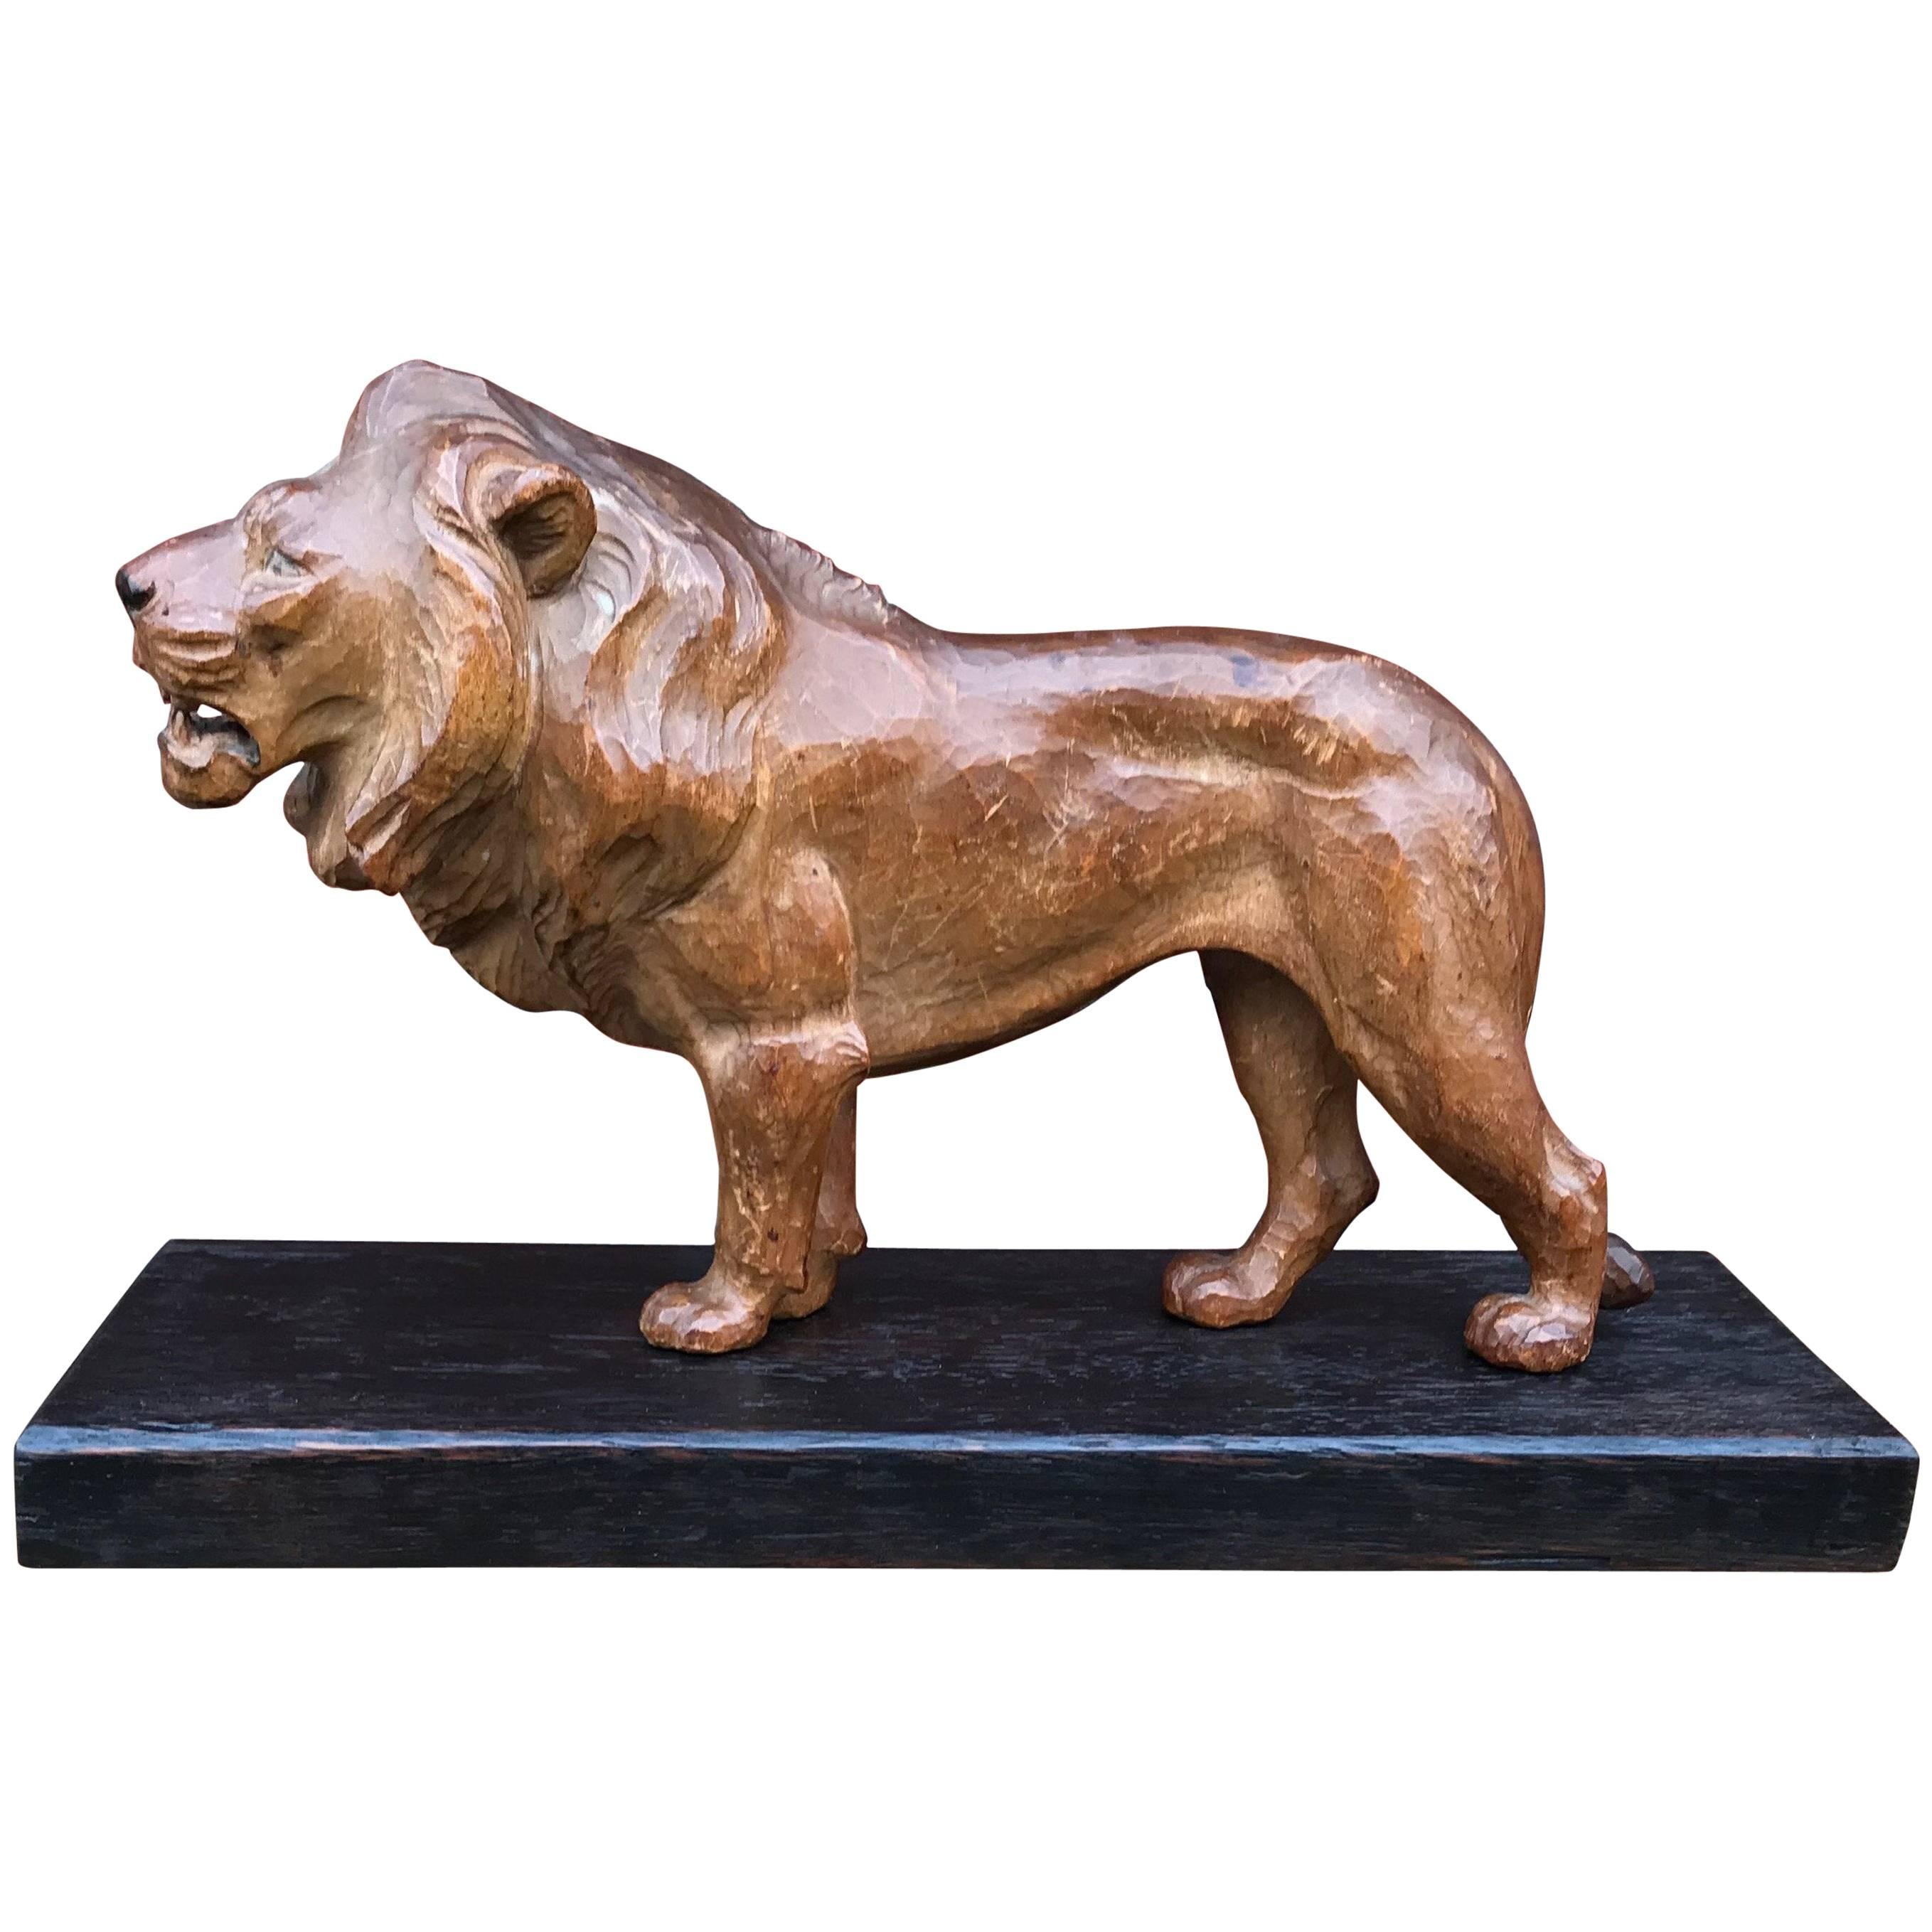 Early 20th Century Hand-Carved Lion Sculpture Statue on Base, King of the Jungle